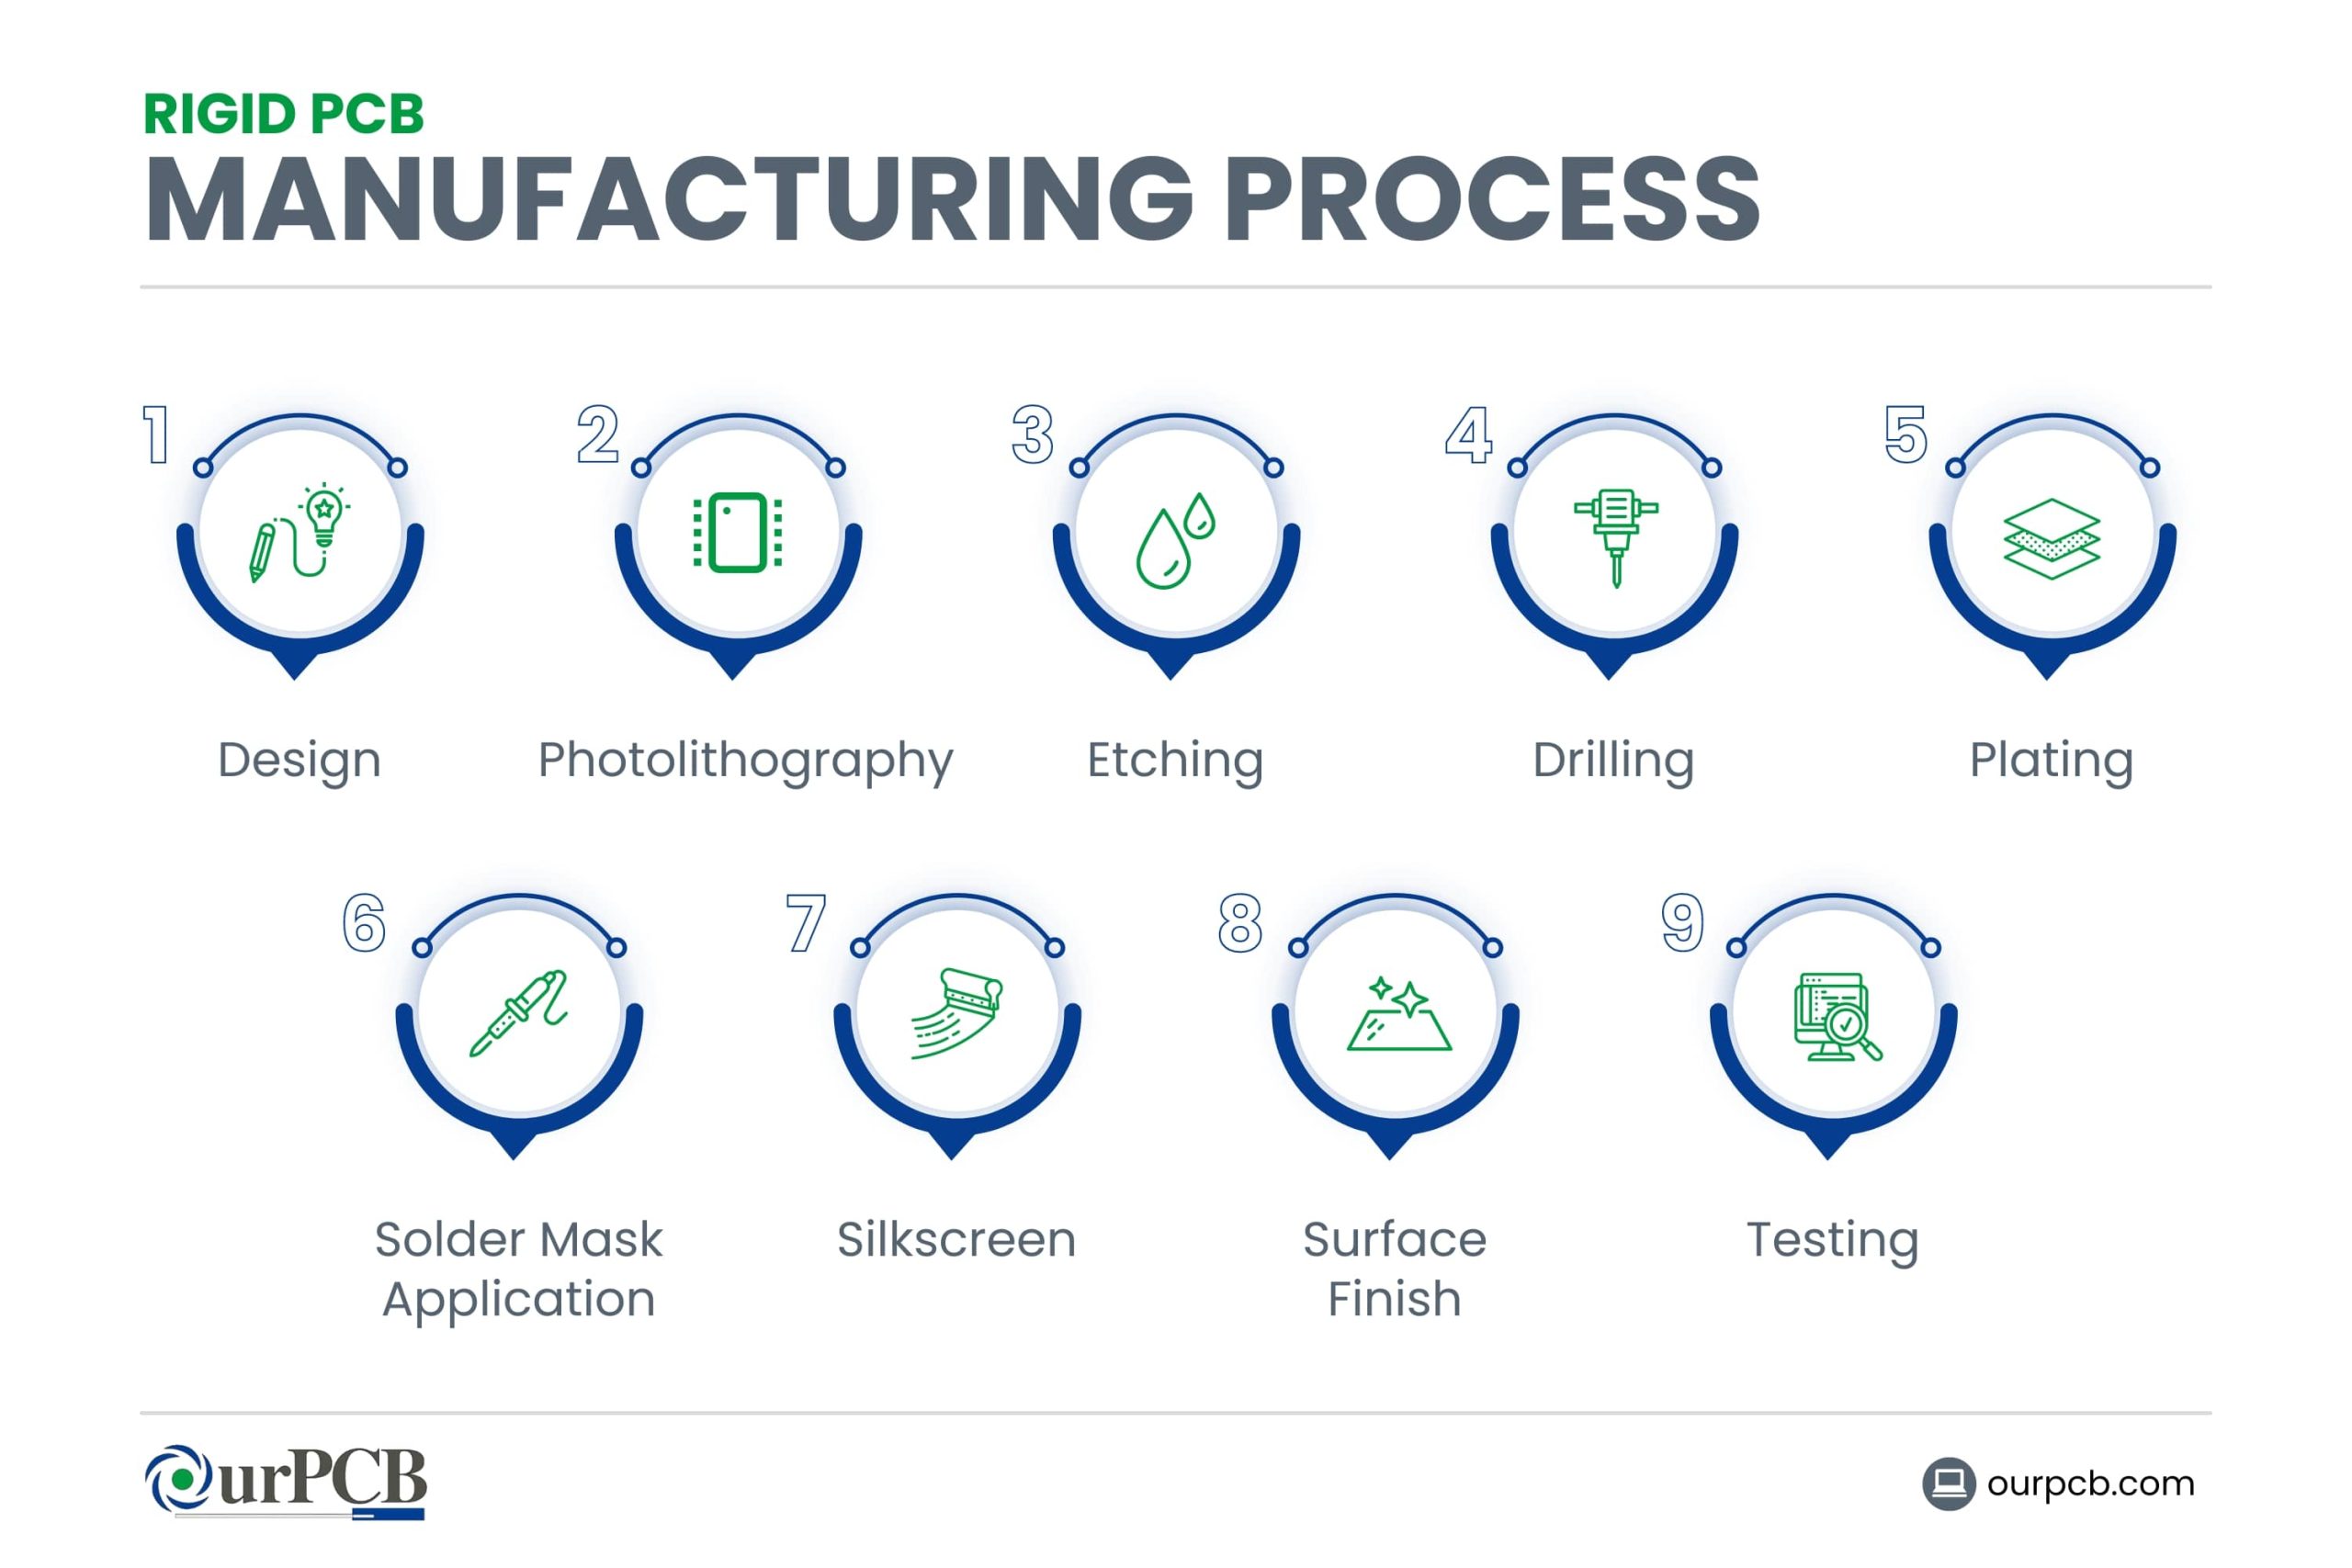 Step by Step Manufacturing Process of Rigid PCB 